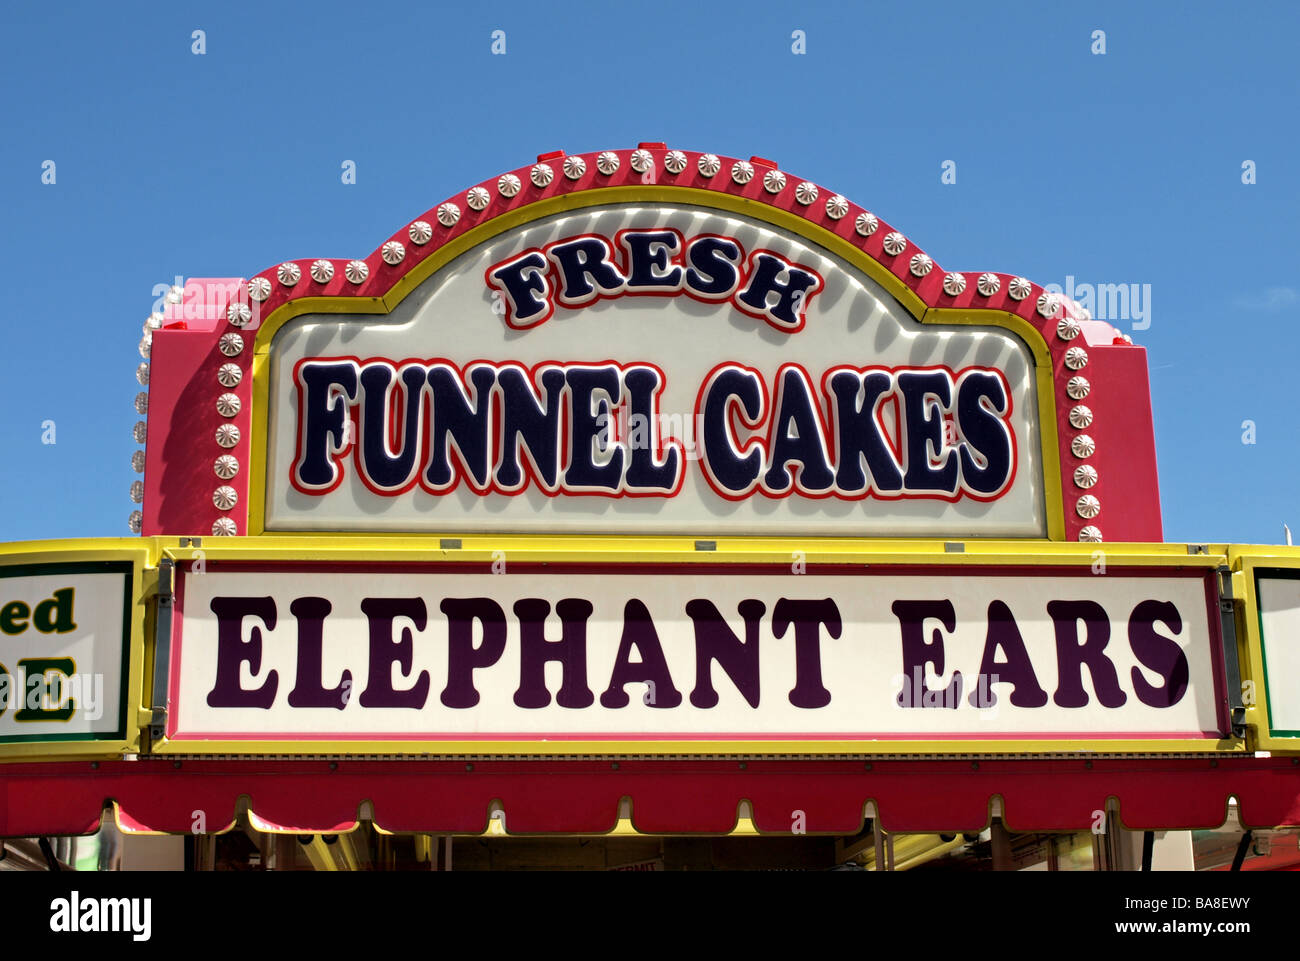 carnival festival food signs for fast food including elephant ears and funnel cakes, blue sky and bright pink framing Stock Photo